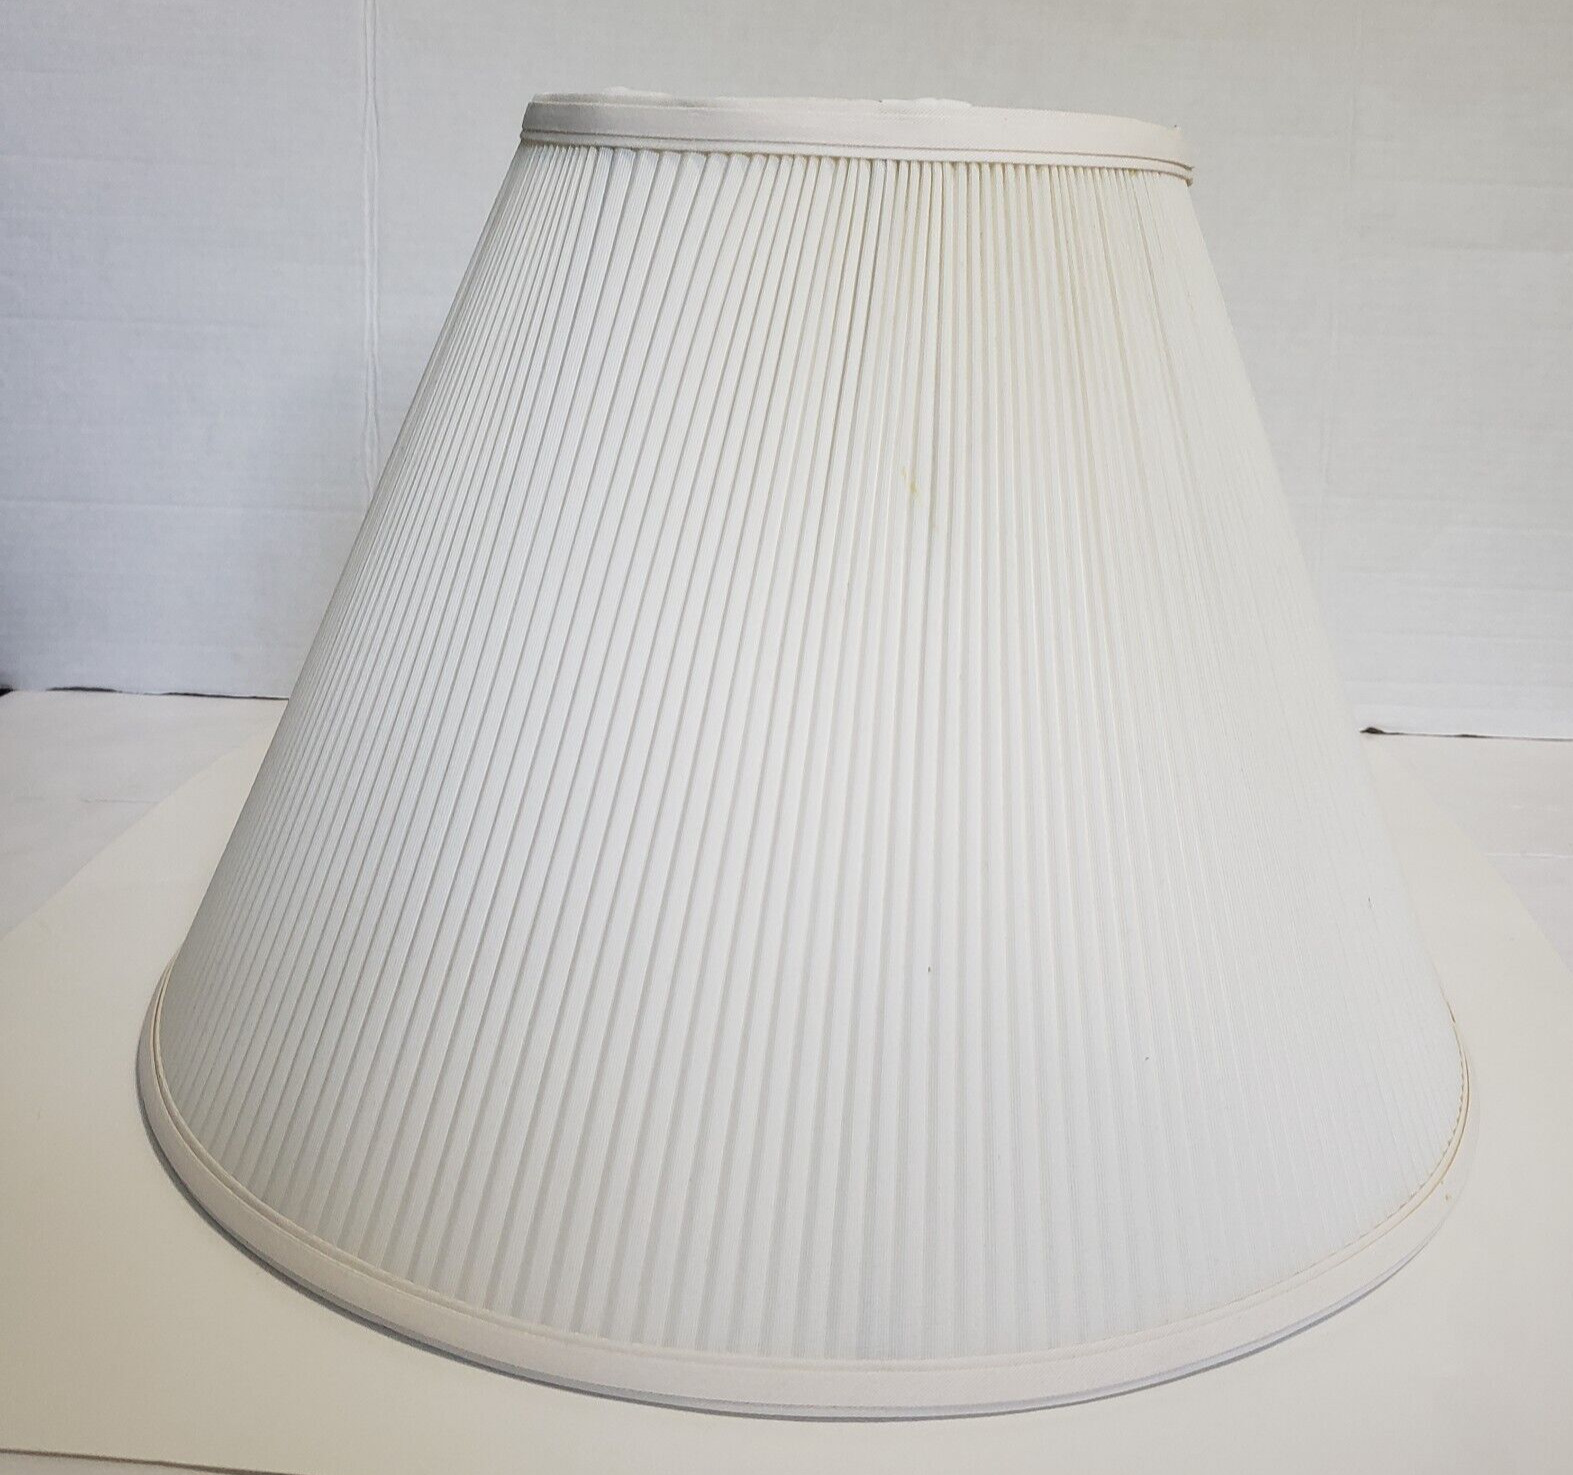 Bell Lamp Shade White Fabric Pleated 12 Inches Tall 16.5 inch Diameter Unbranded